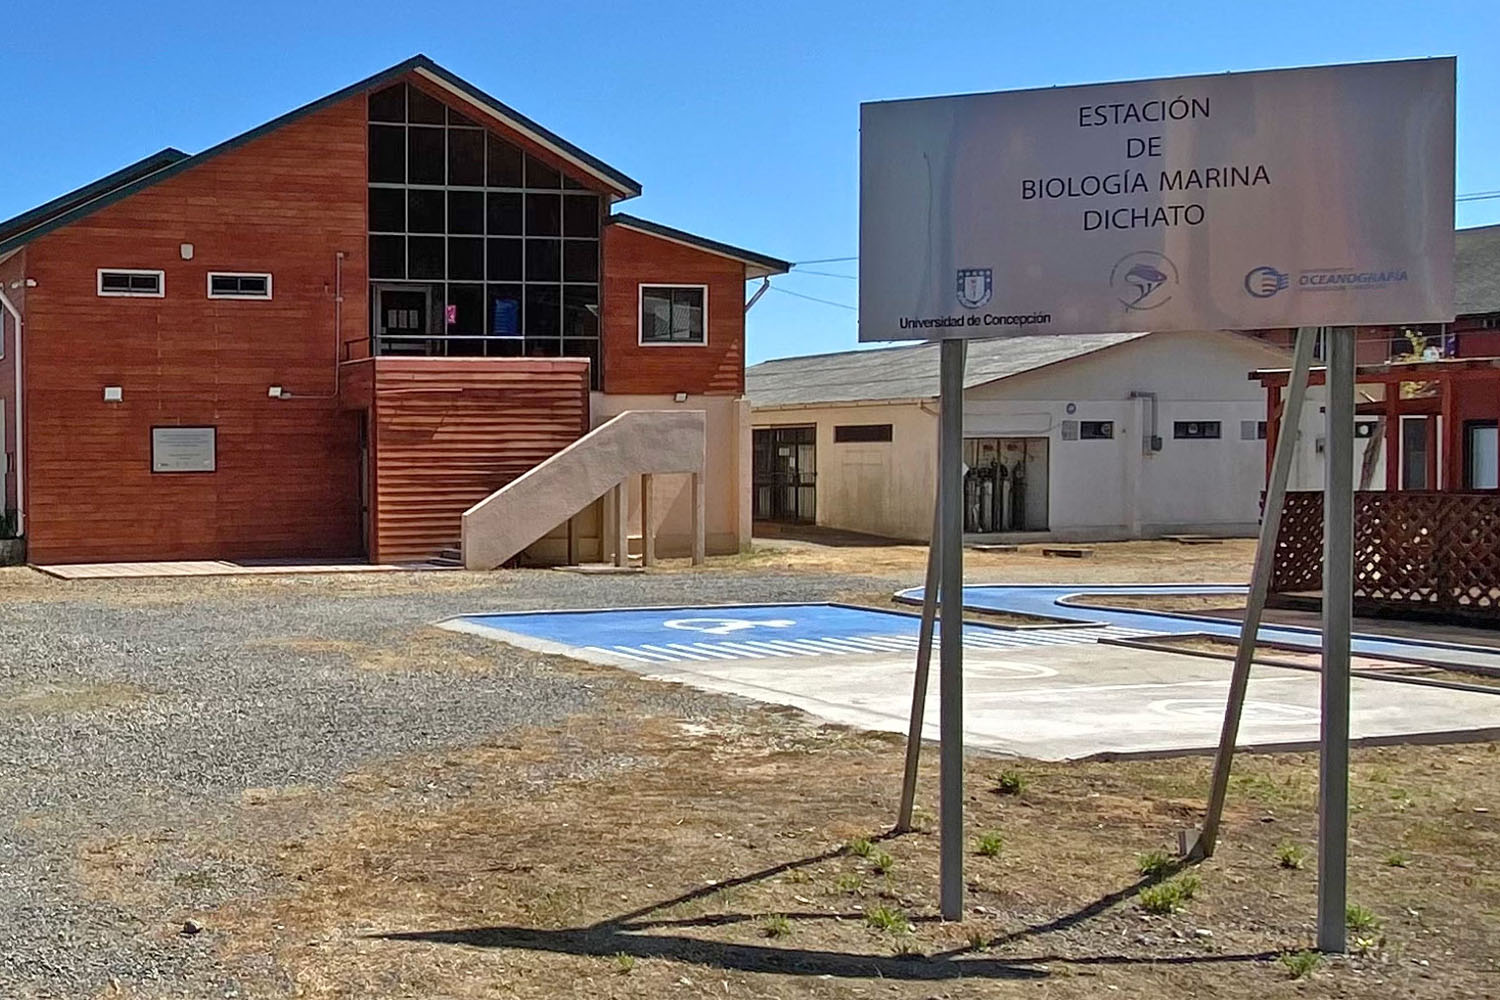 The experiments will be conducted at the Marine Station of the University of Concepcion in Dichato. The station was completely destroyed after a tsunami in 2010, but has since been newly rebuilt and improved.